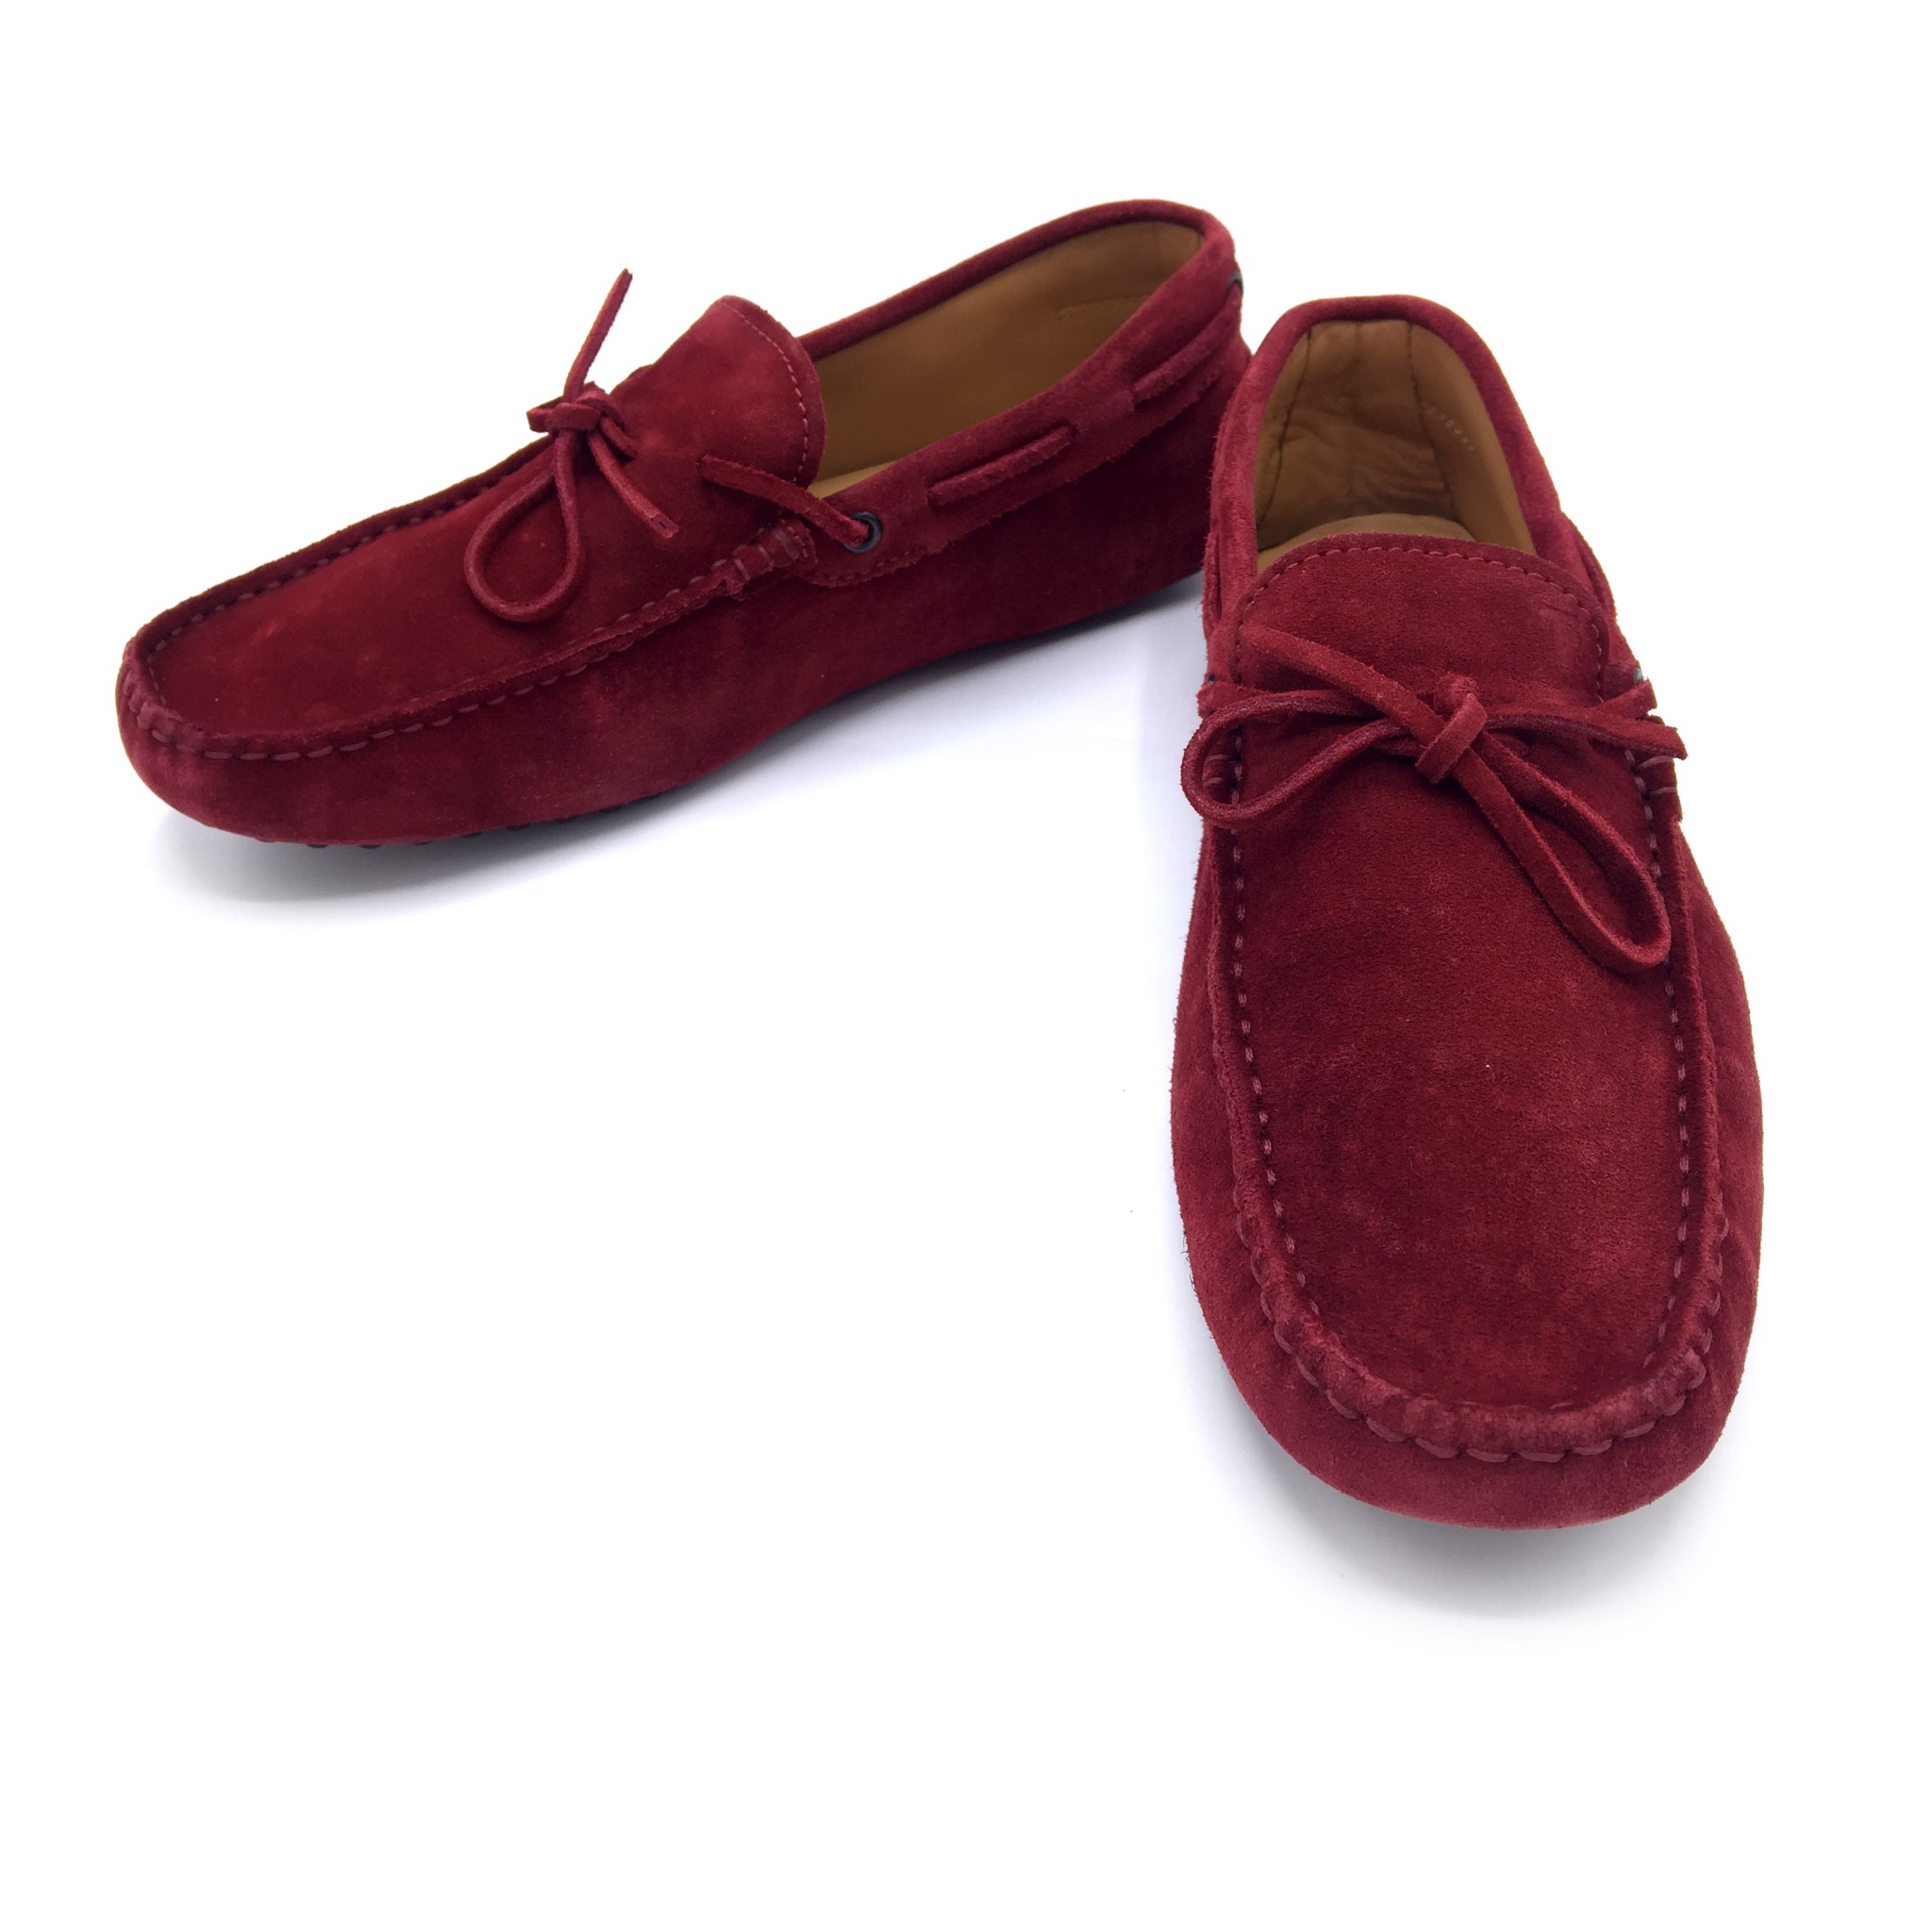 Used TOD'S Gommino Shoes 6" in Burgundy Suede